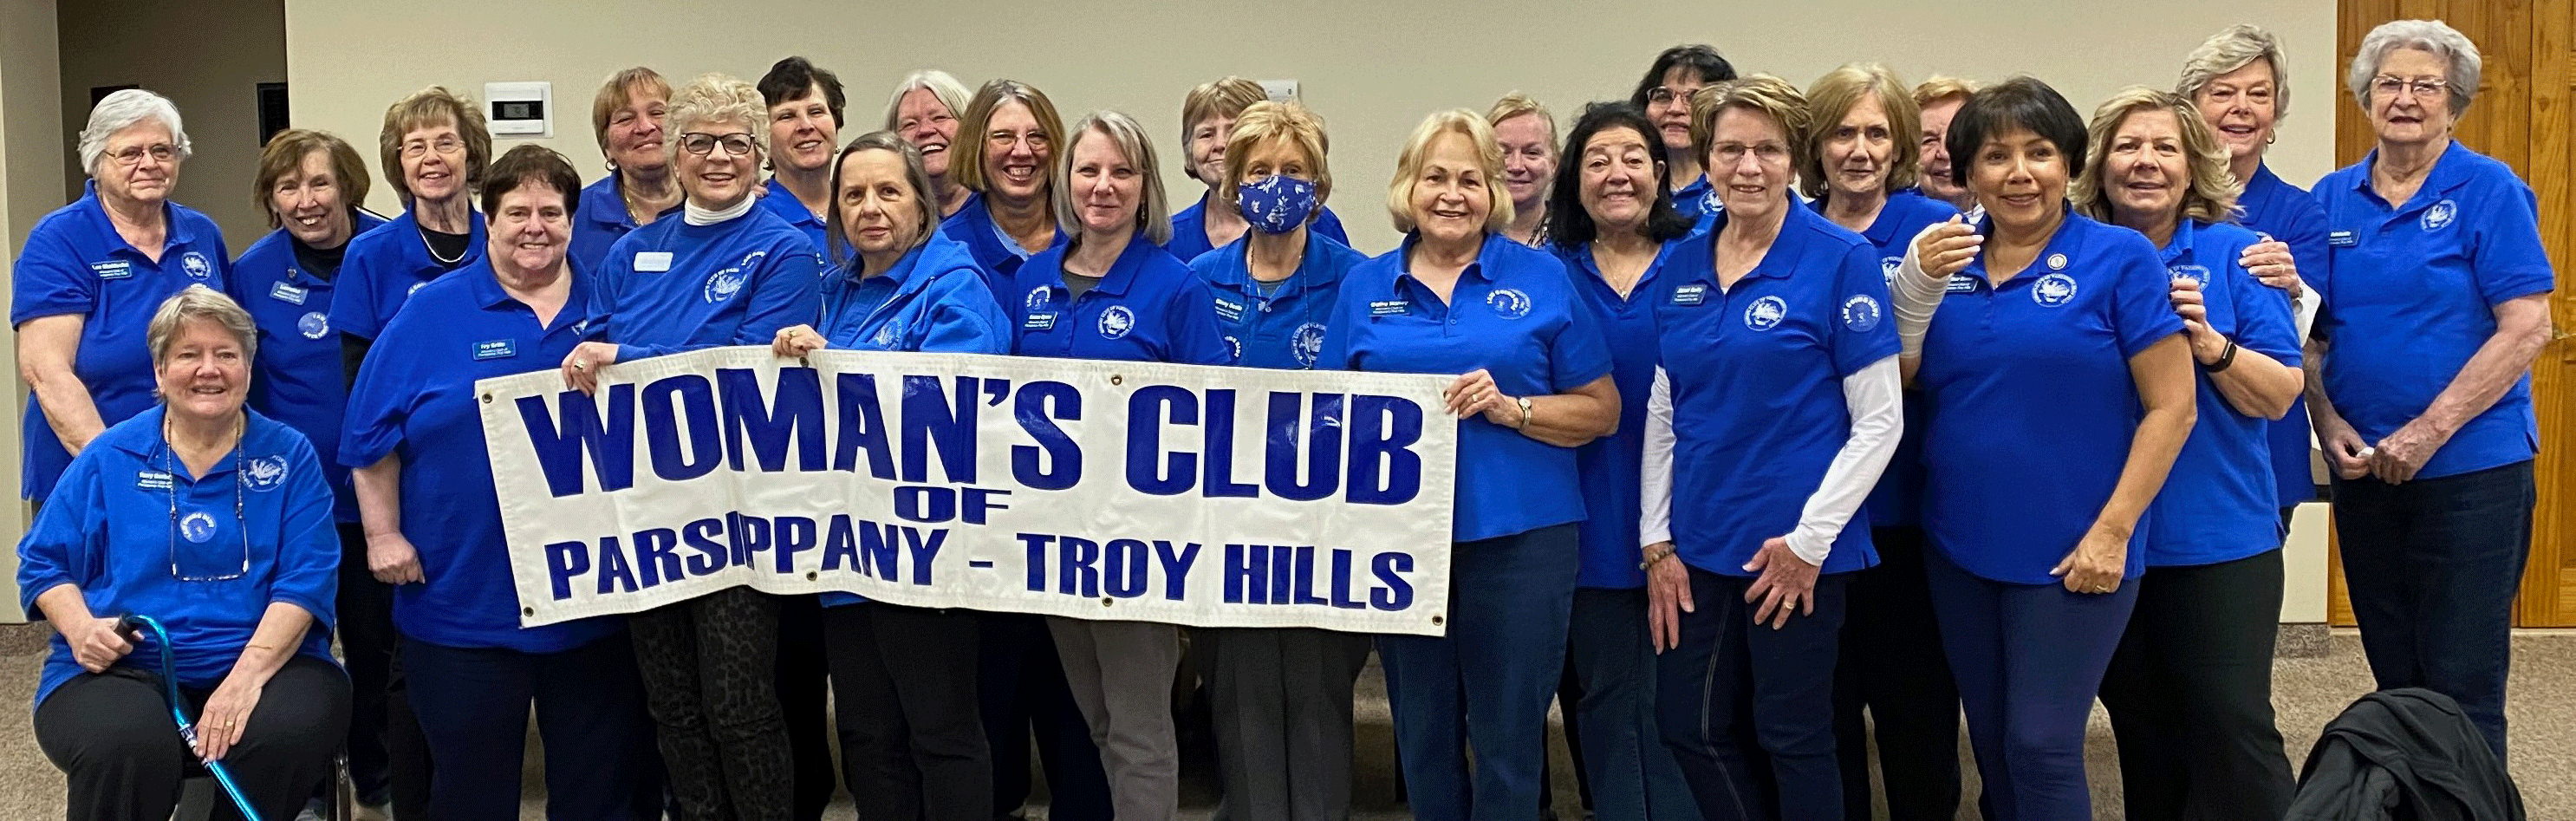 Woman's Club of Parsippany- Troy Hills